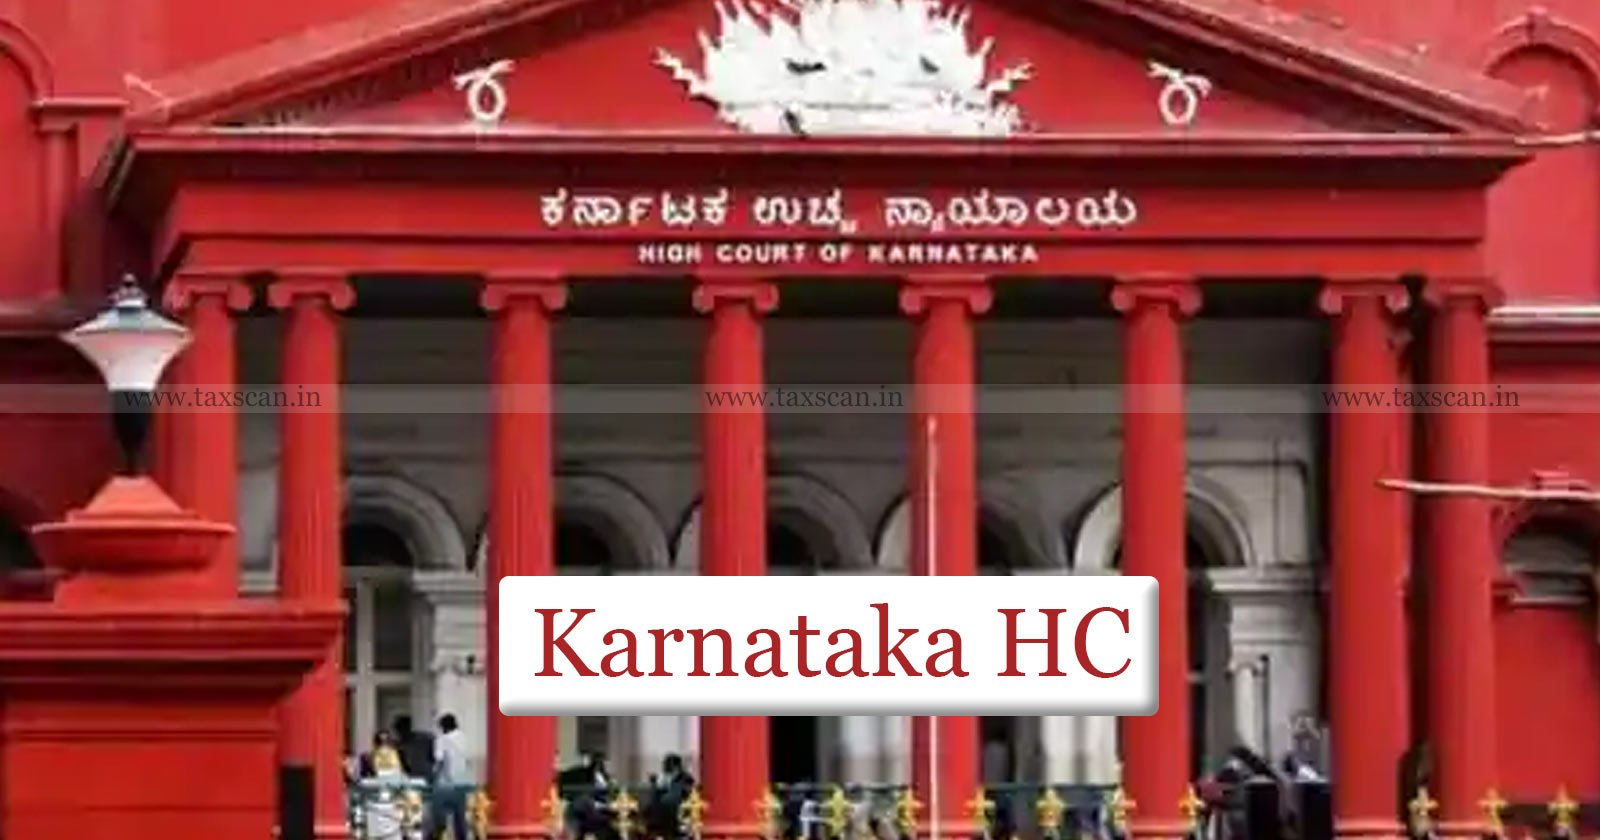 Relief to Manipal Finance Corporation Ltd - Karnataka HC dismisses Appeal of Revenue on Grounds of - Monetary Limits - TAXSCAN